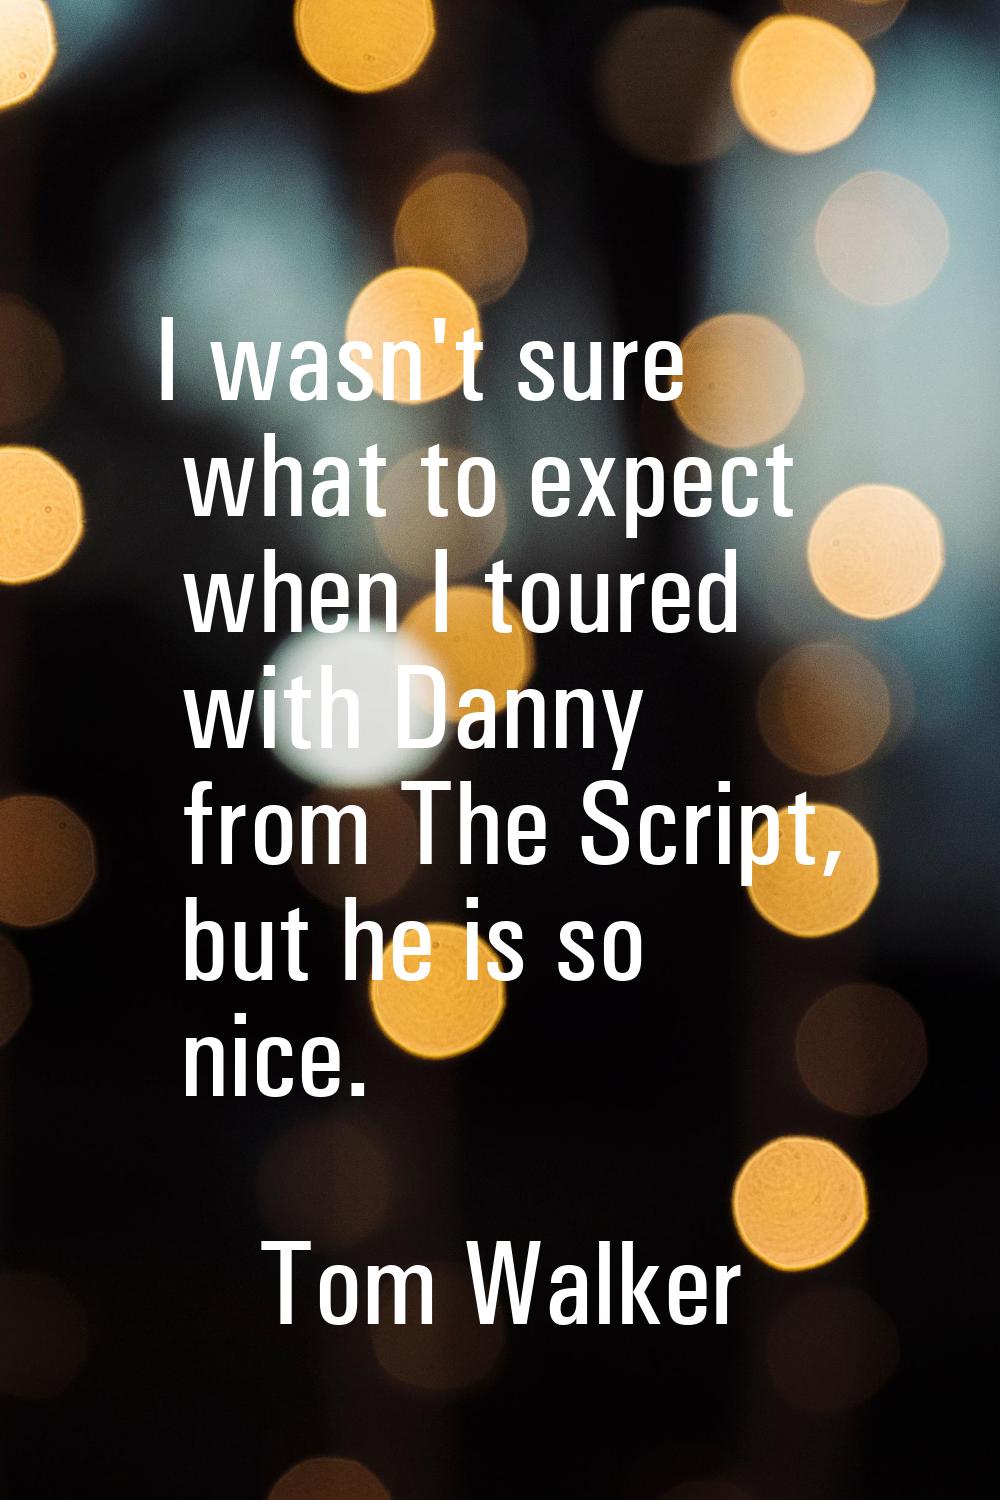 I wasn't sure what to expect when I toured with Danny from The Script, but he is so nice.